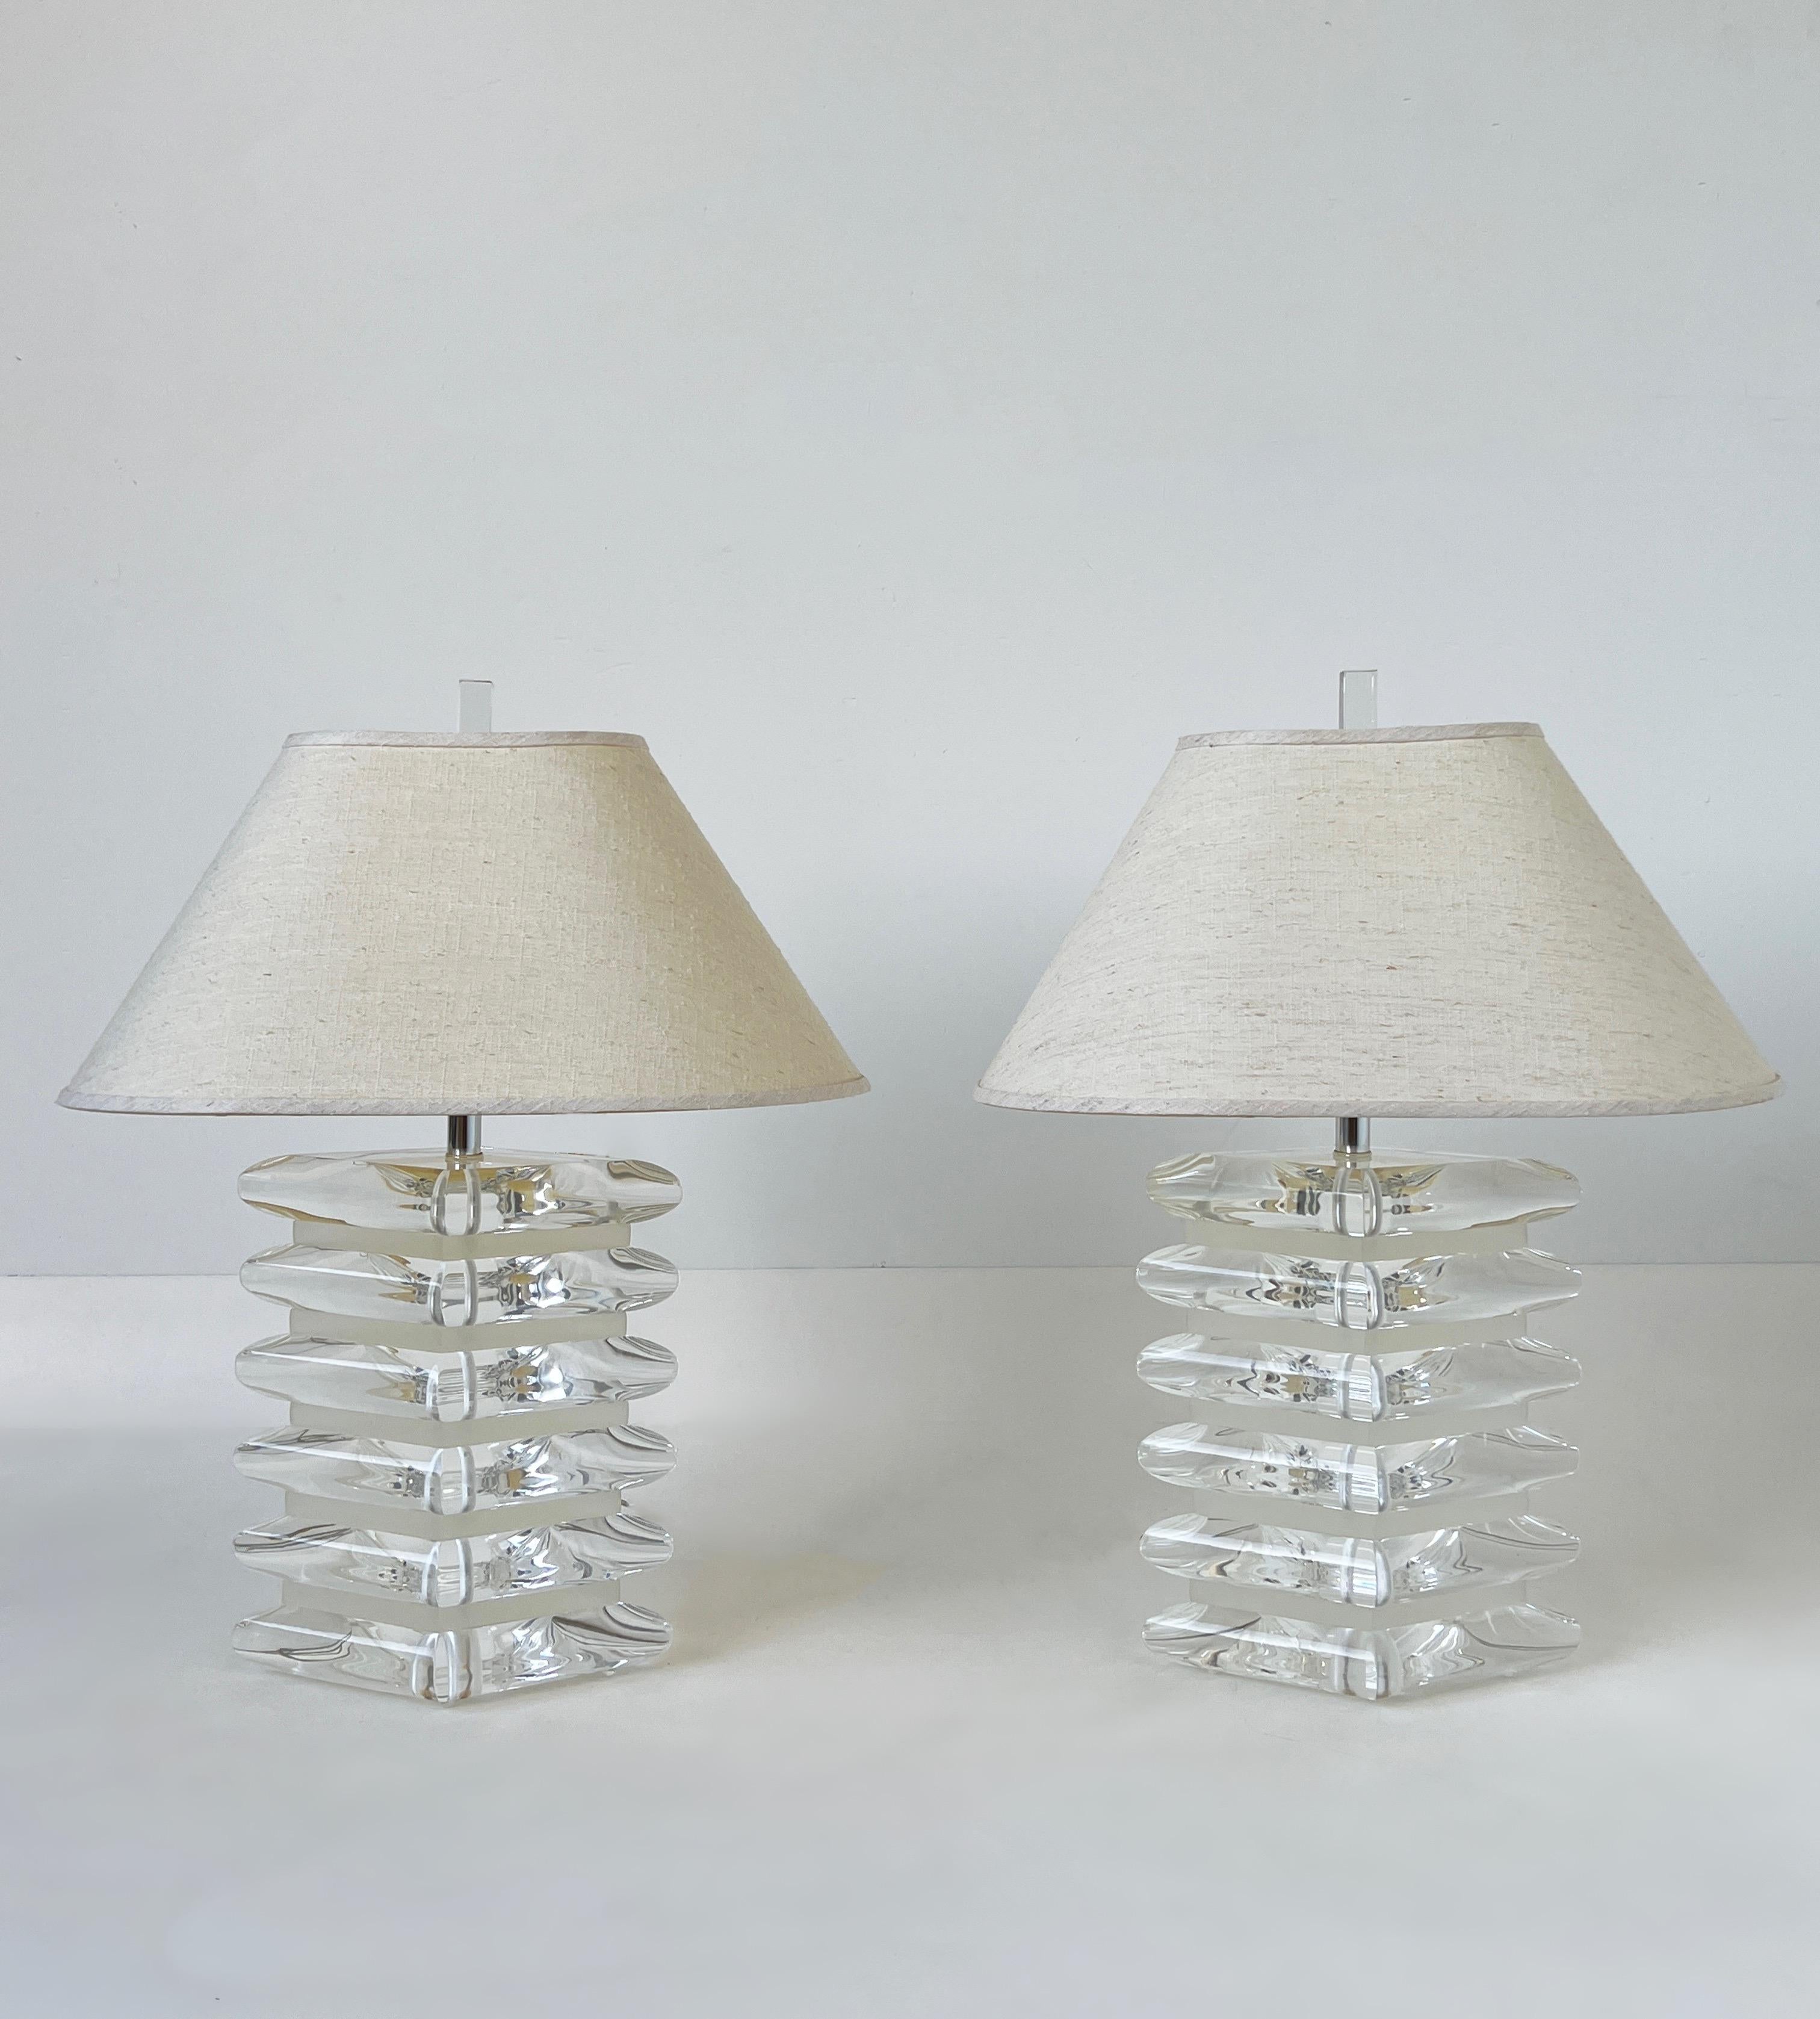 Pair of thick clear and satin diamond shape acrylic and chrome with linen shades table lamps from the 1980’s. 
In beautiful vintage condition, newly rewired.
The shades are original they show minor wear consistent with age. 
Measurements: 13”